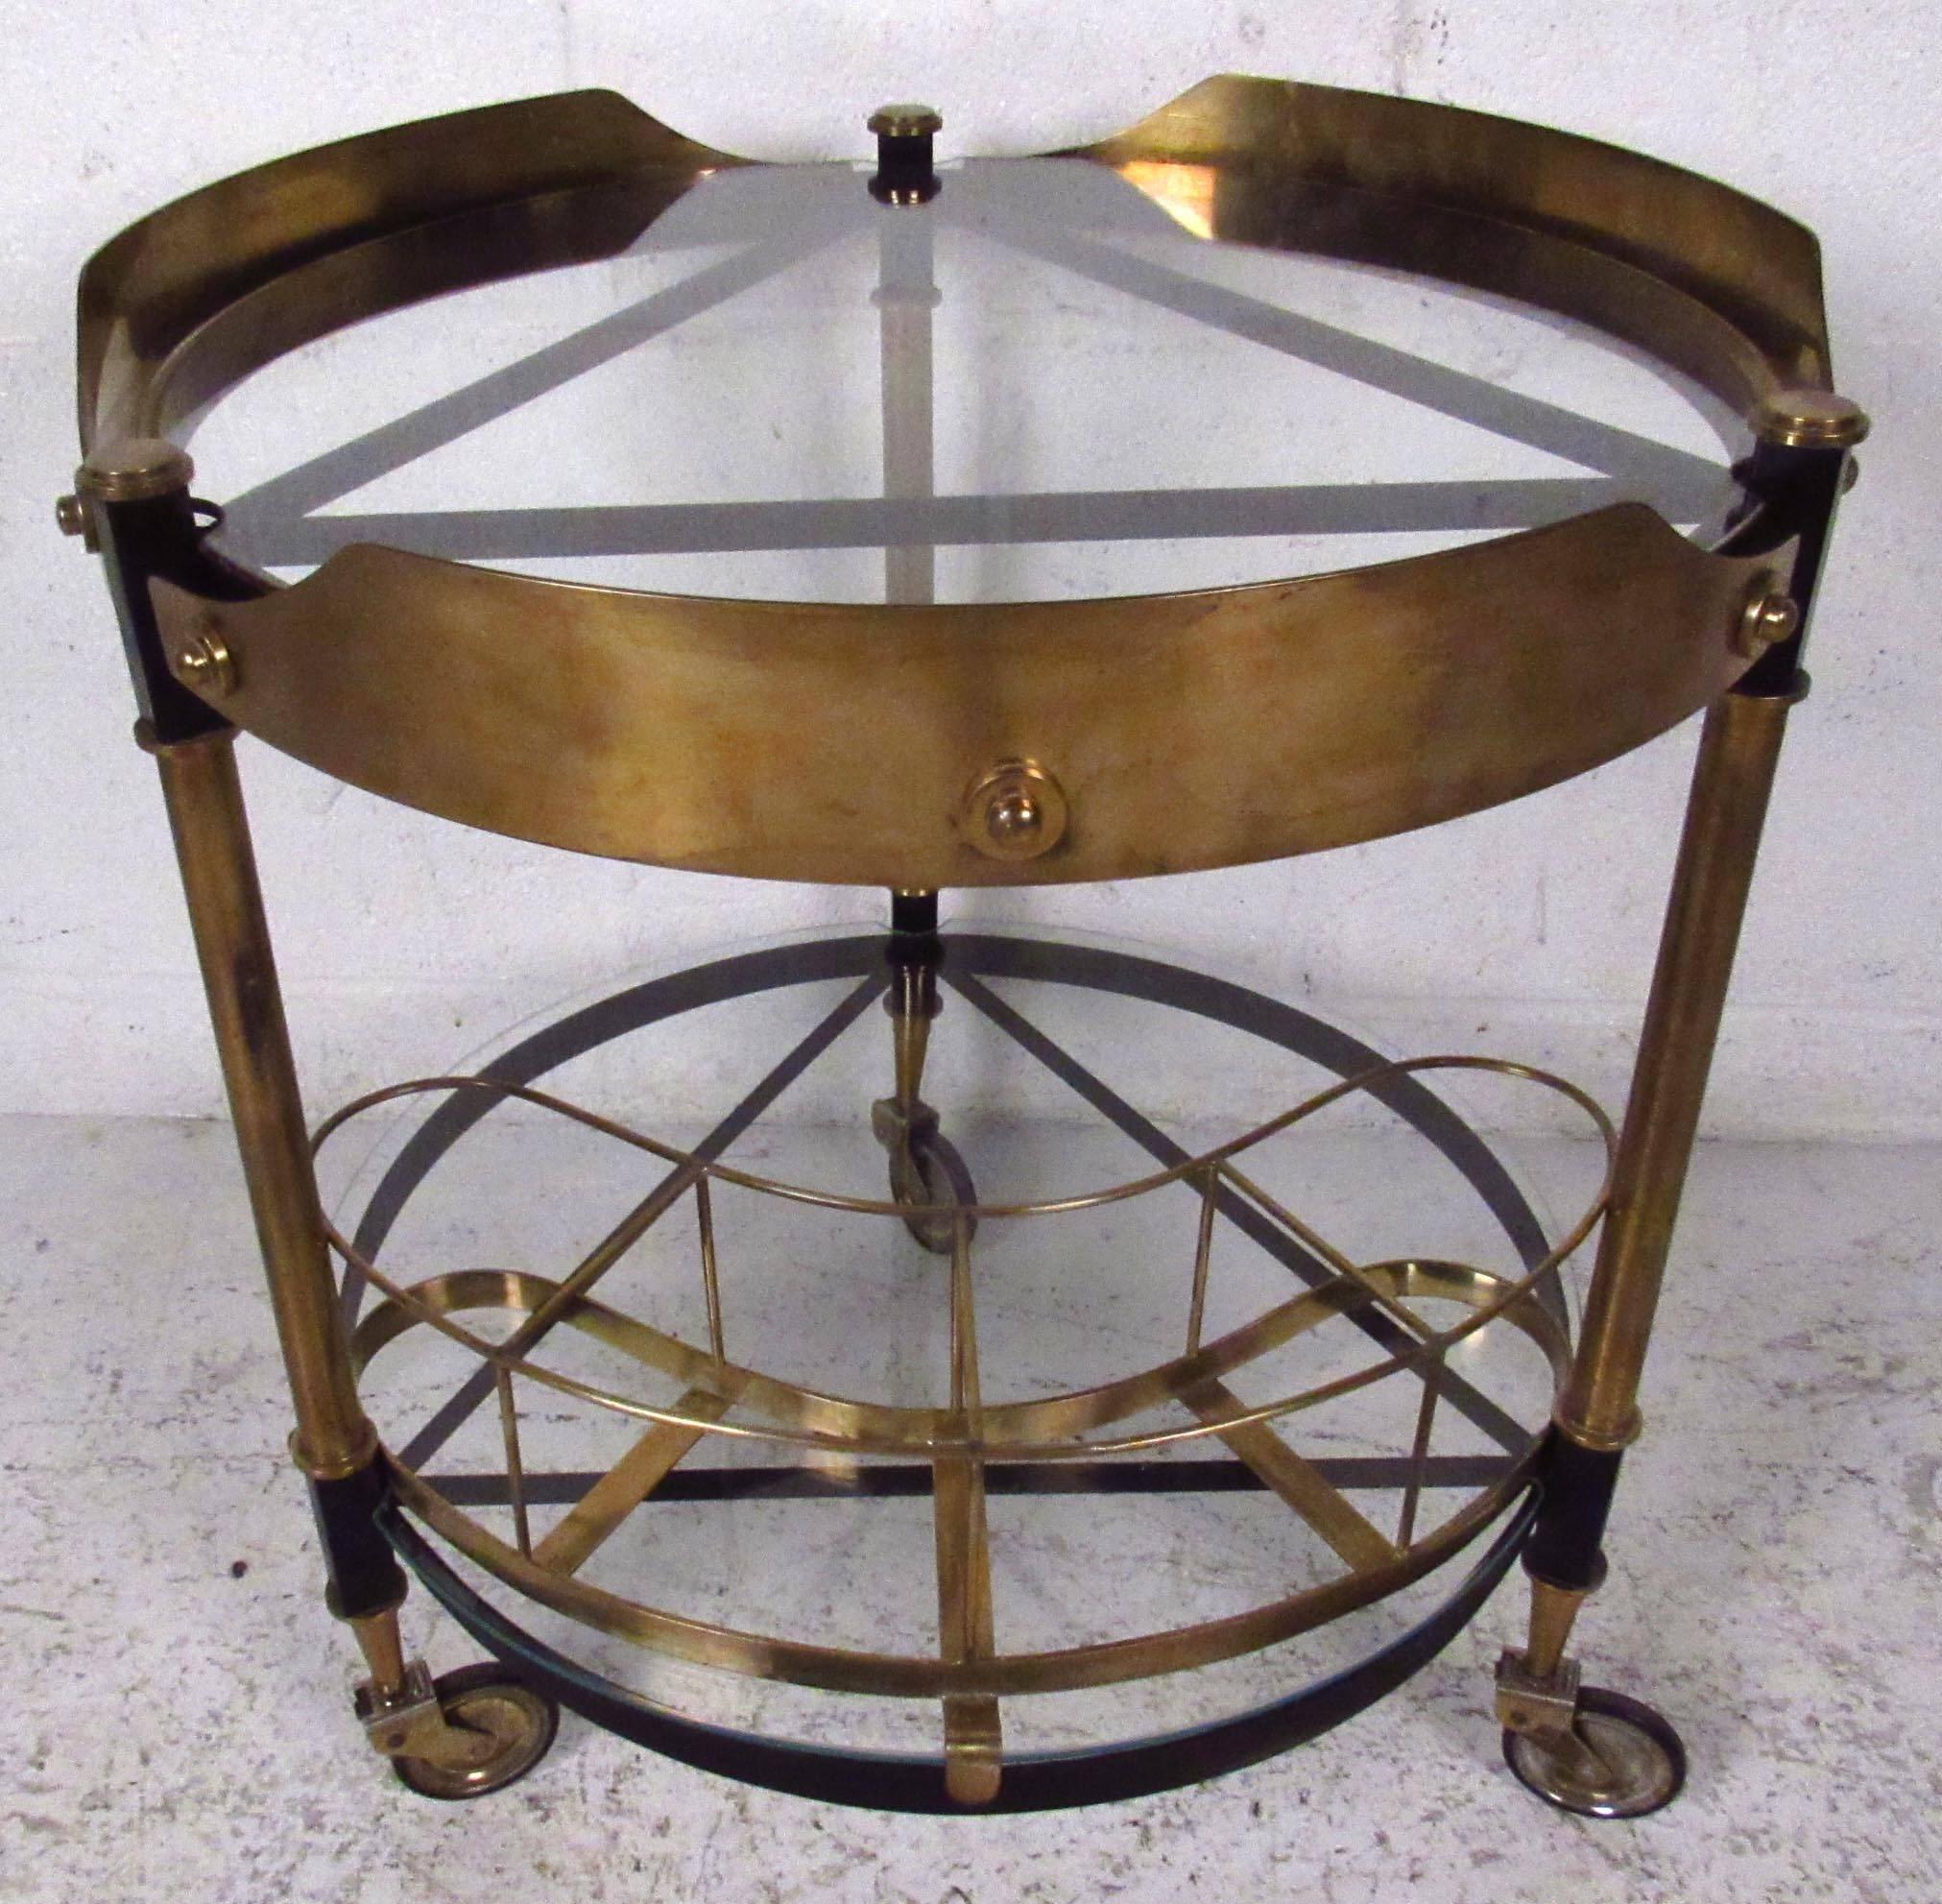 Vintage-modern serving cart featuring sculpted bronze and iron body with glass inserts. The stylish geometric approach to this midcentury Italian bar cart makes a striking and versatile addition to home or business. 

Please confirm item location